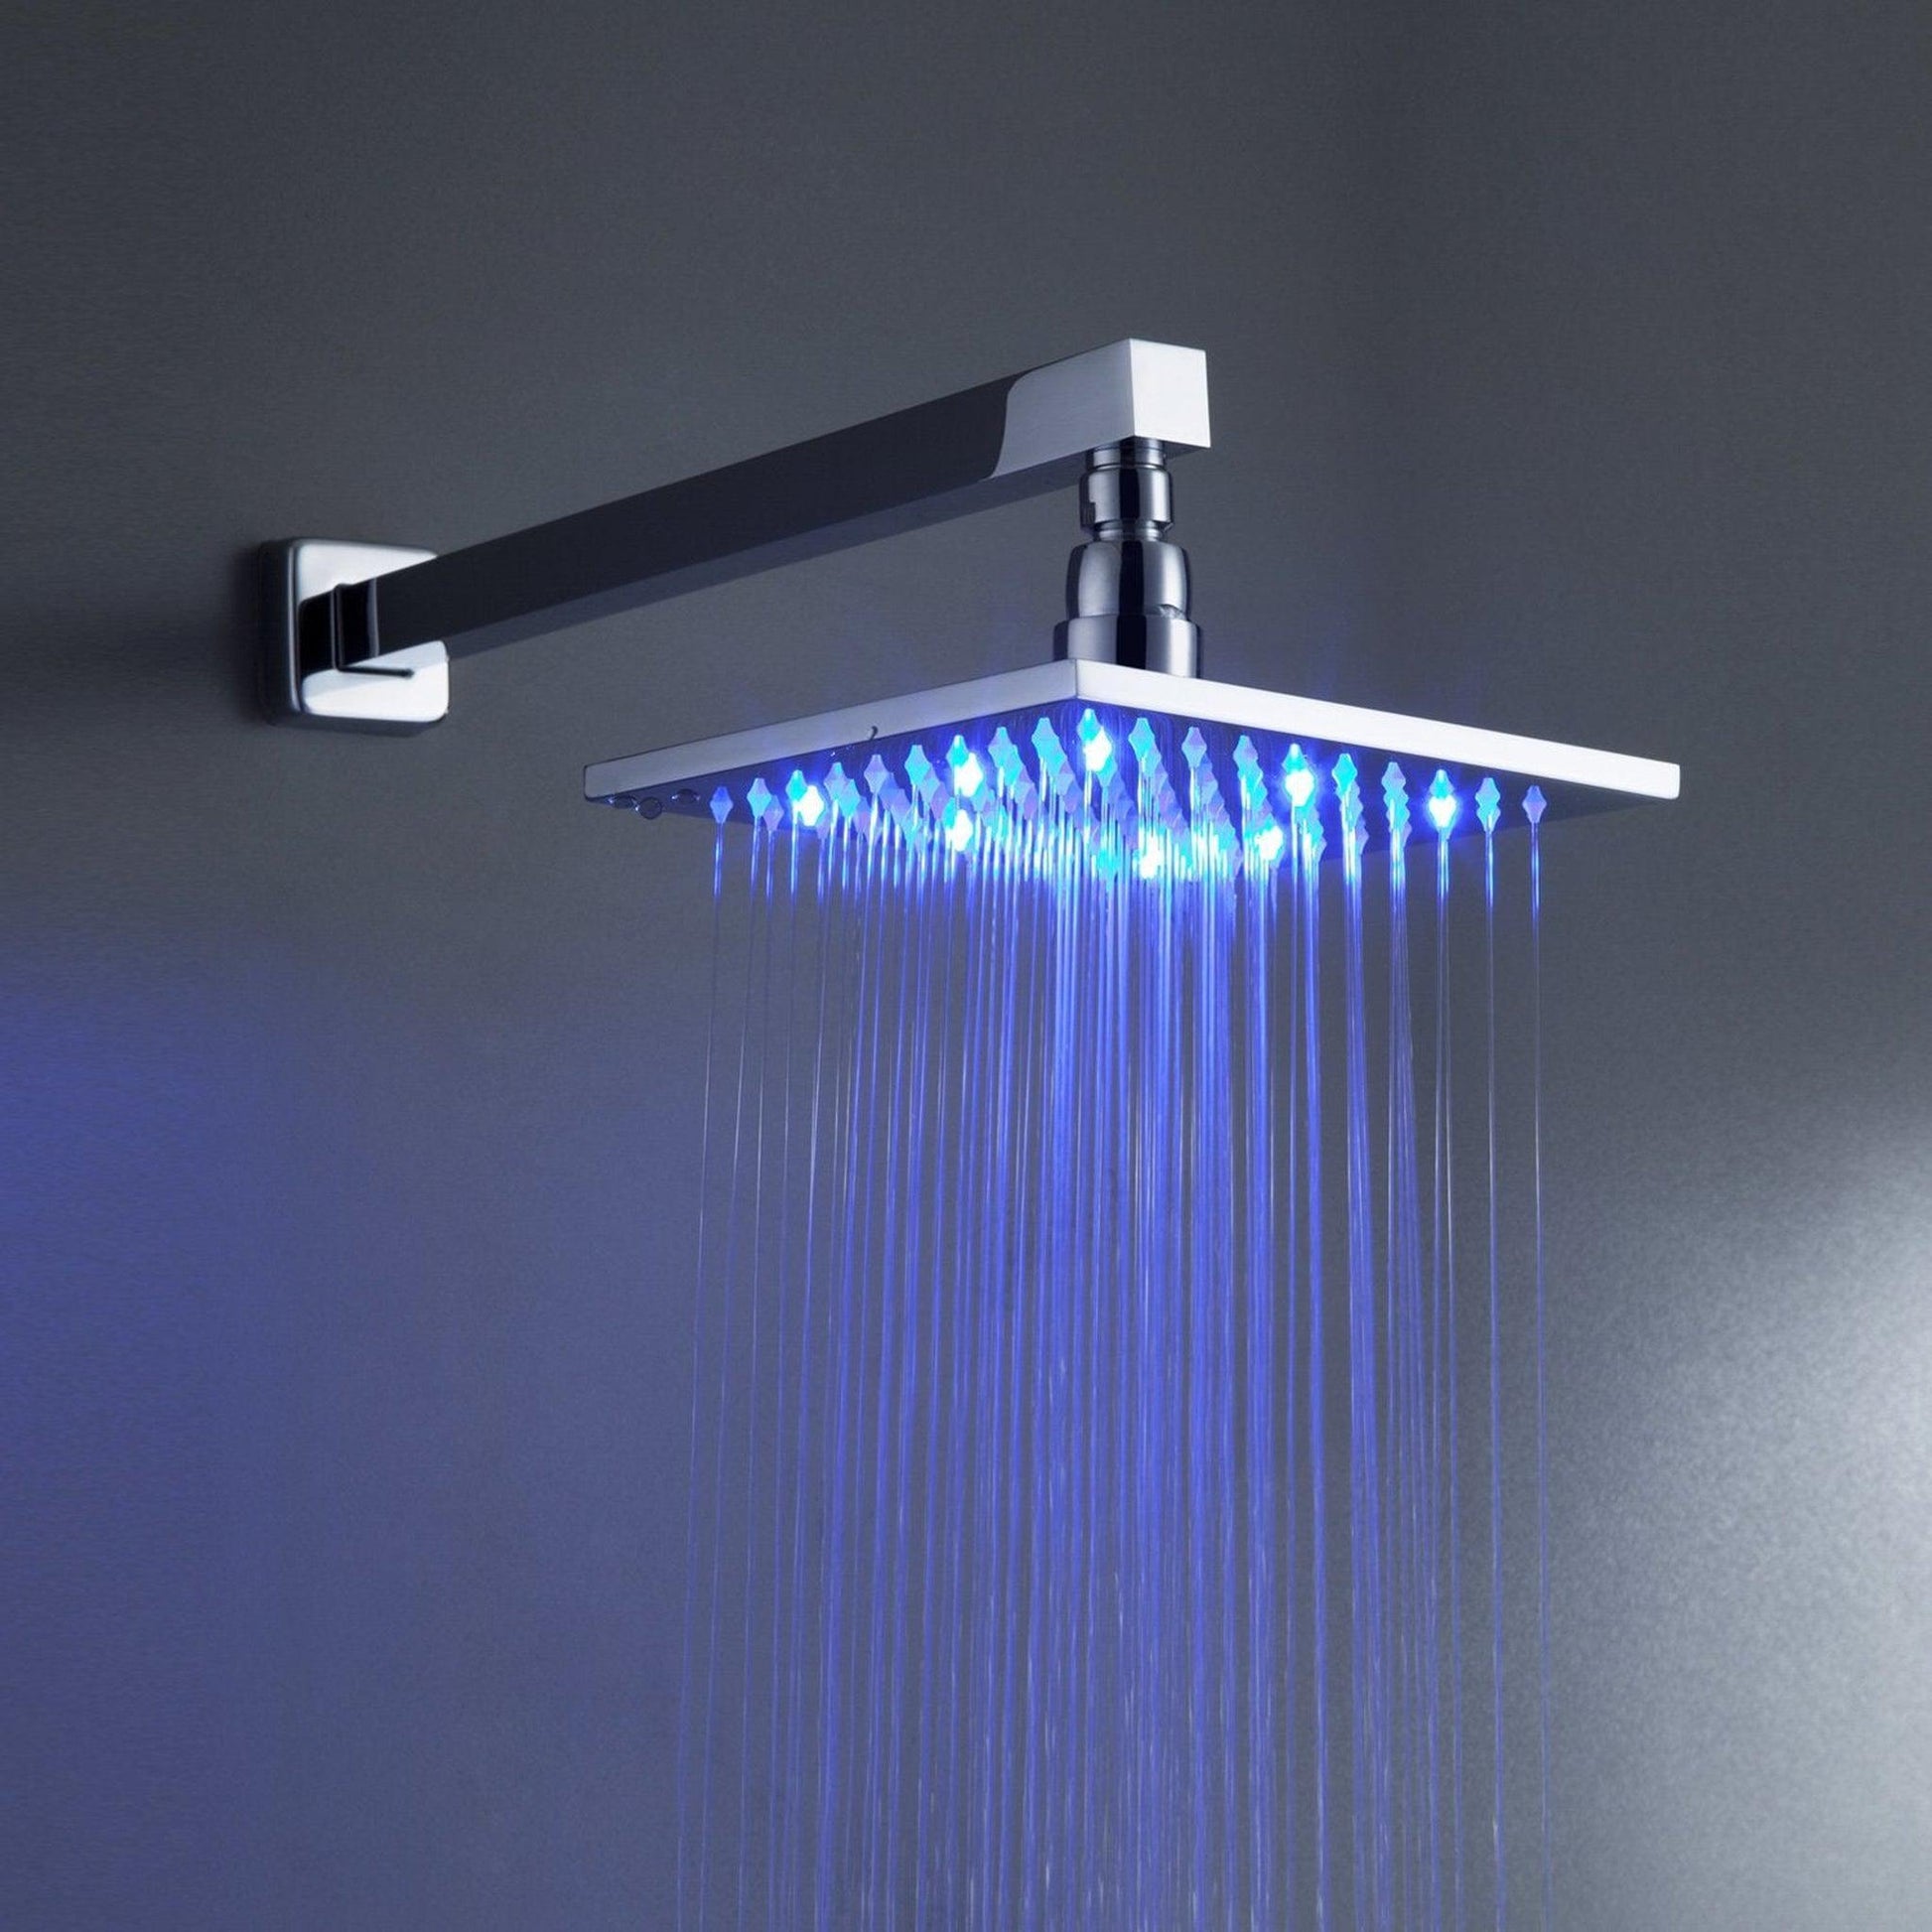 FontanaShowers Milan Creative Luxury 20" Chrome Square Wall-Mounted LED Rainfall Shower System With 6-Jet Stainless Steel Massage Sprays and Hand Shower